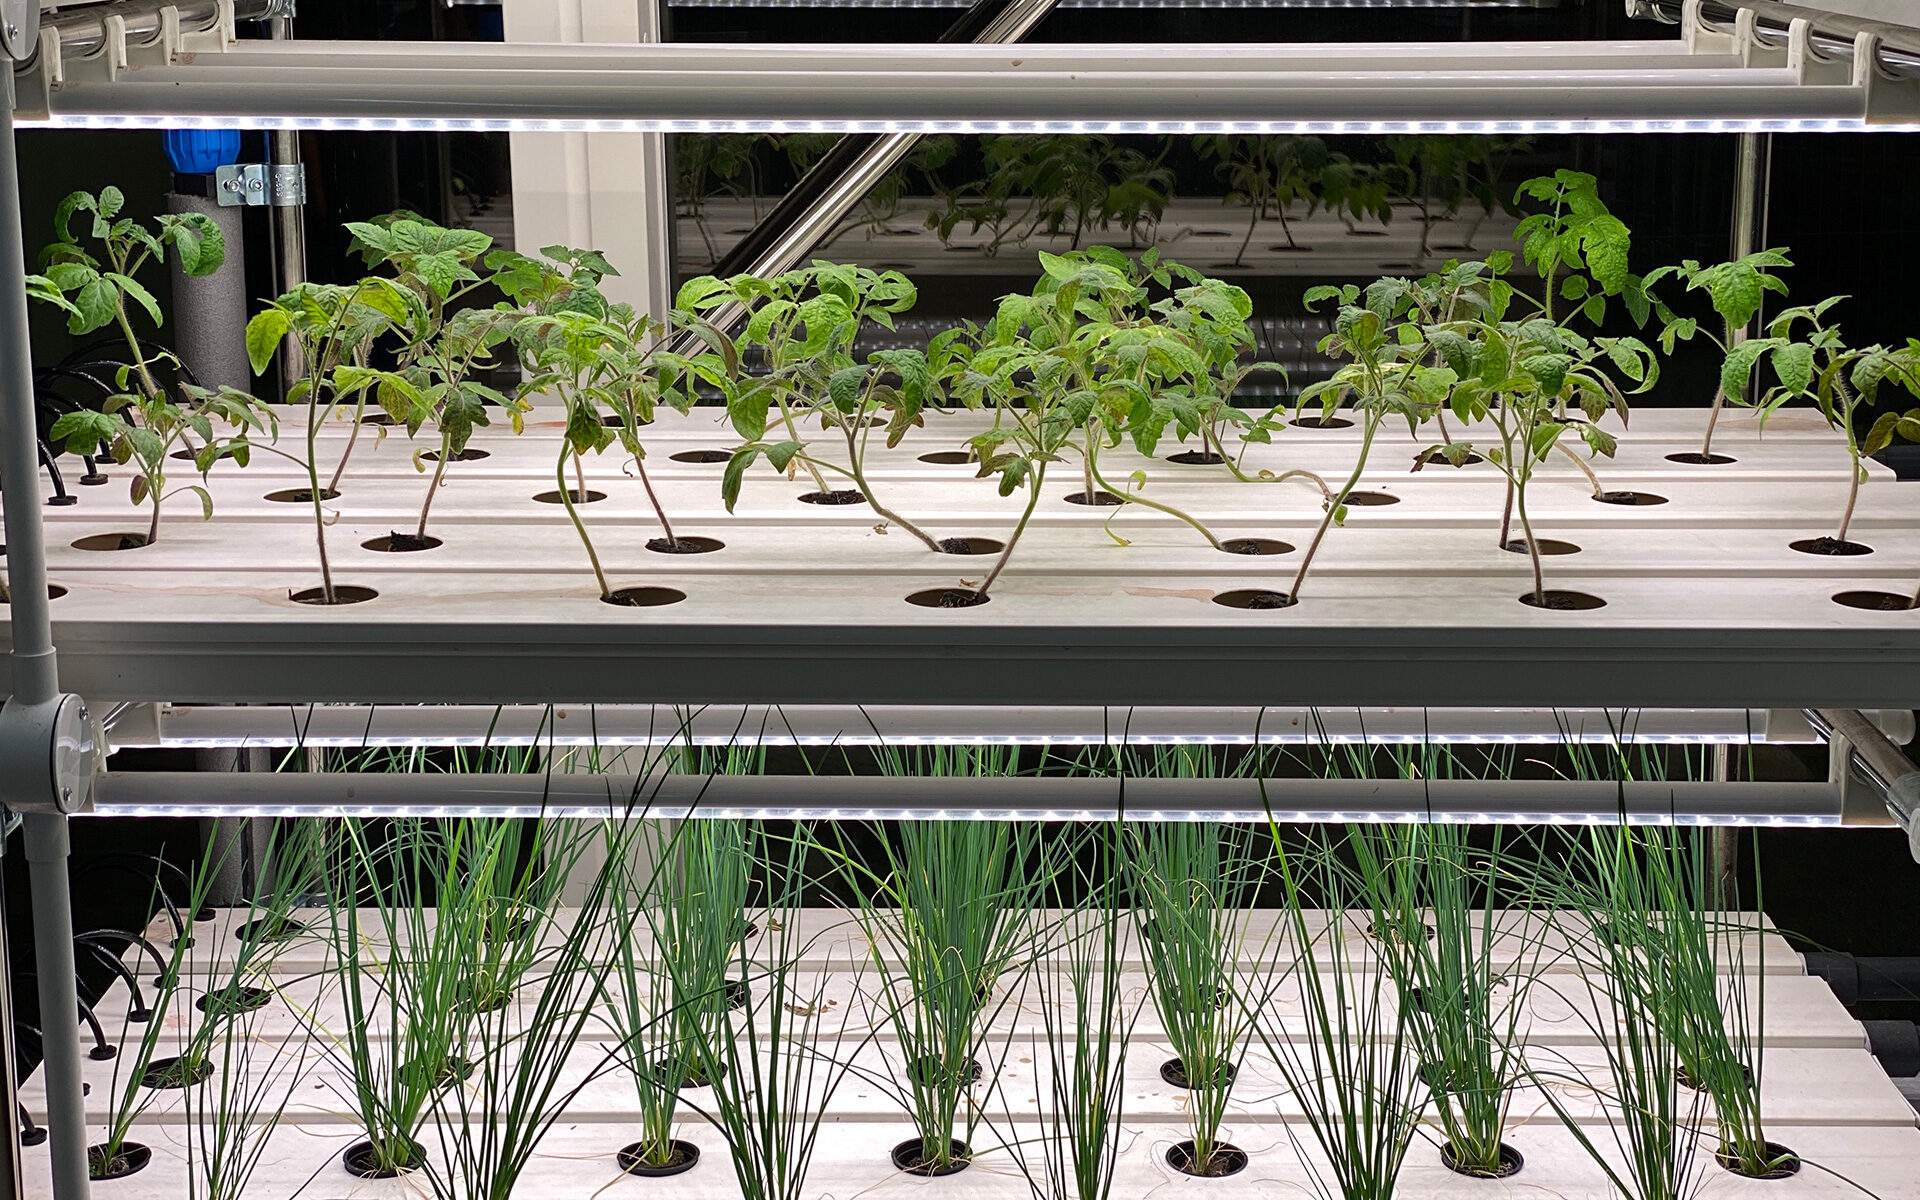 Zero mile crops being grown at Paddington Works | Workspace available to book on demand through Tally Market